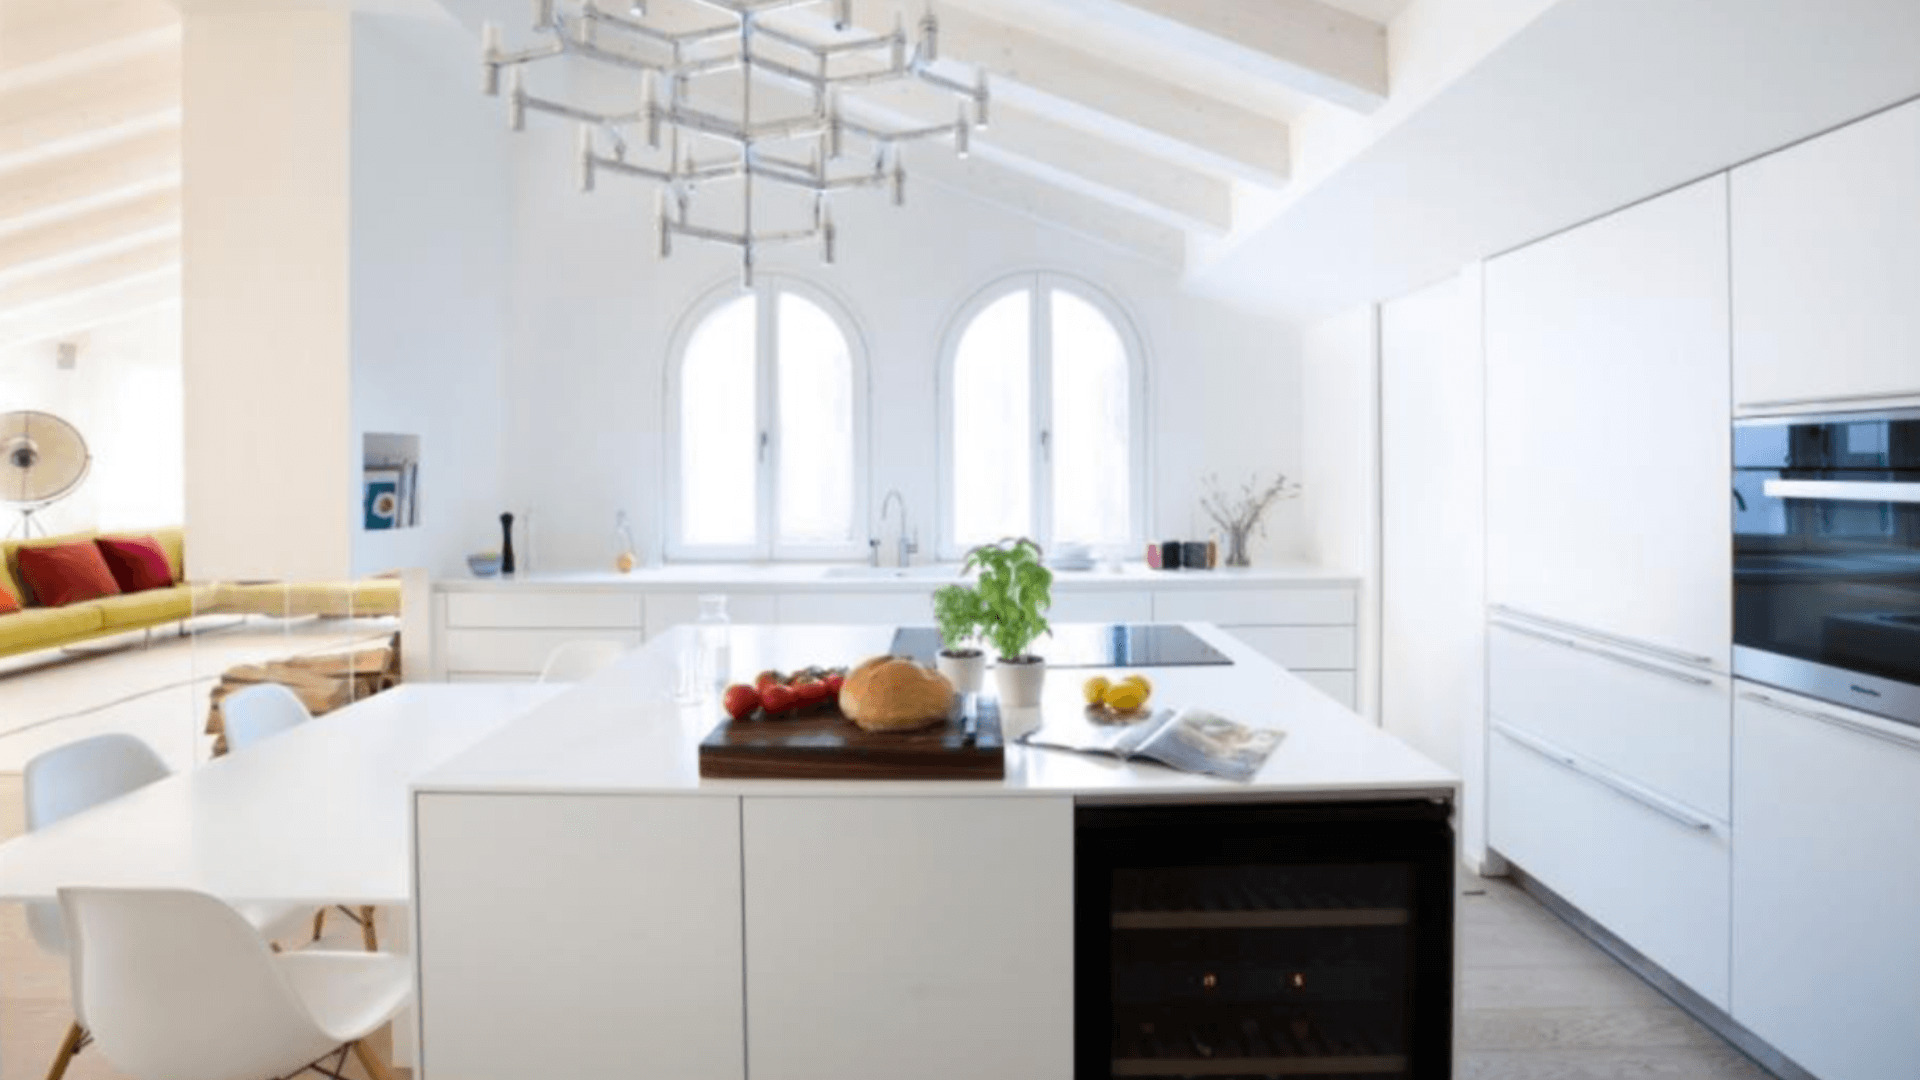 Blog IDW - How to choose the best counter top for your kitchen